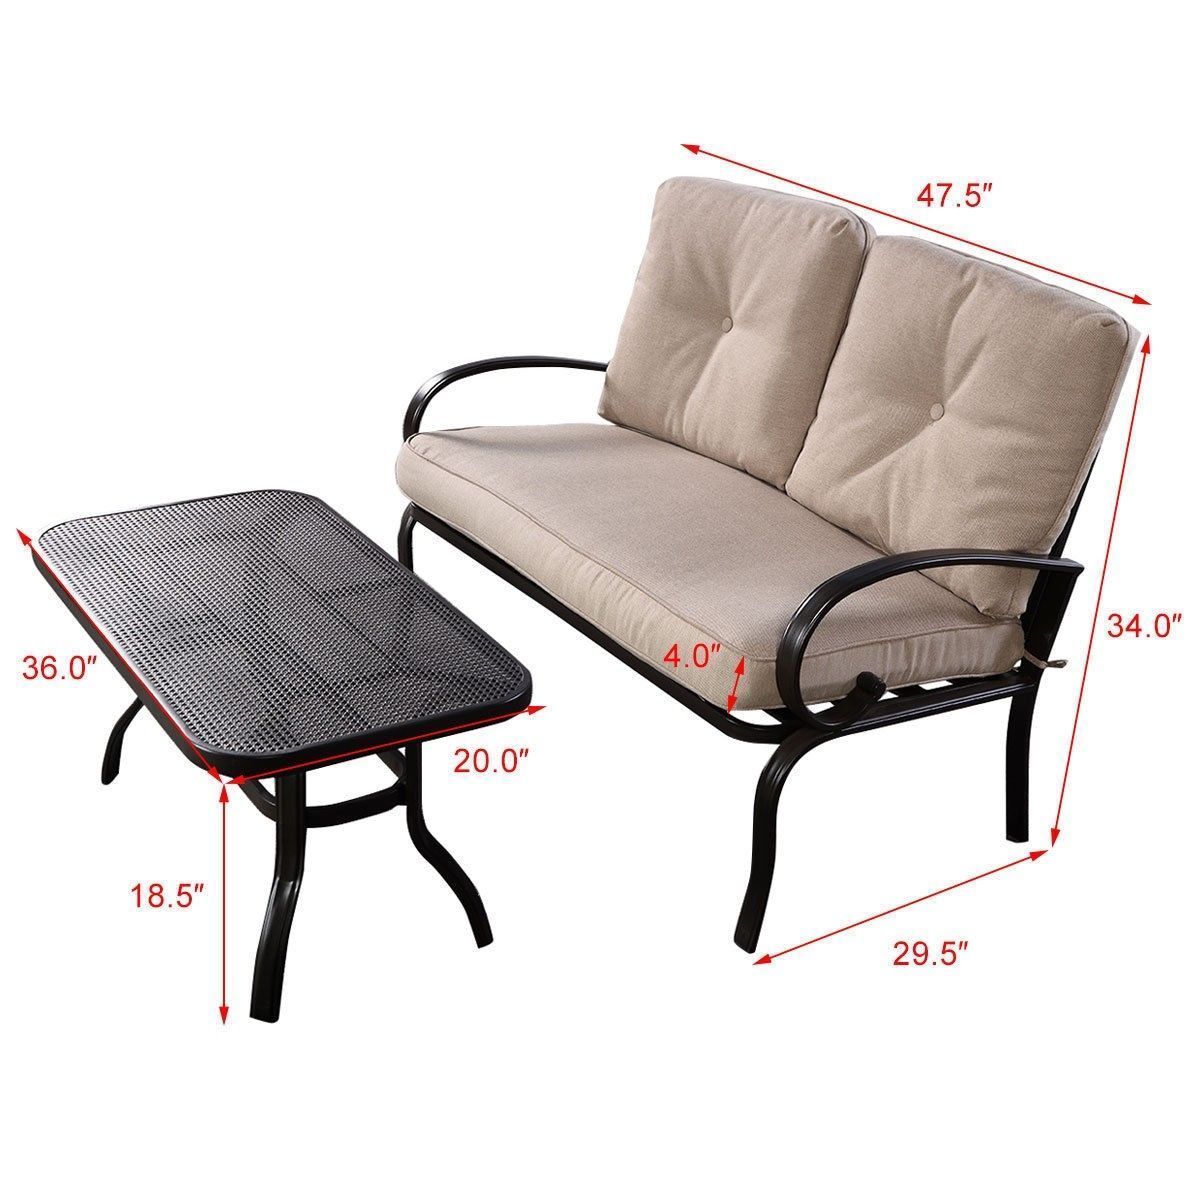 Outdoor Patio Sofa Bistro Steel Seat Coffee Table Loveseat Cushion Clearance 2pc - Patio ...